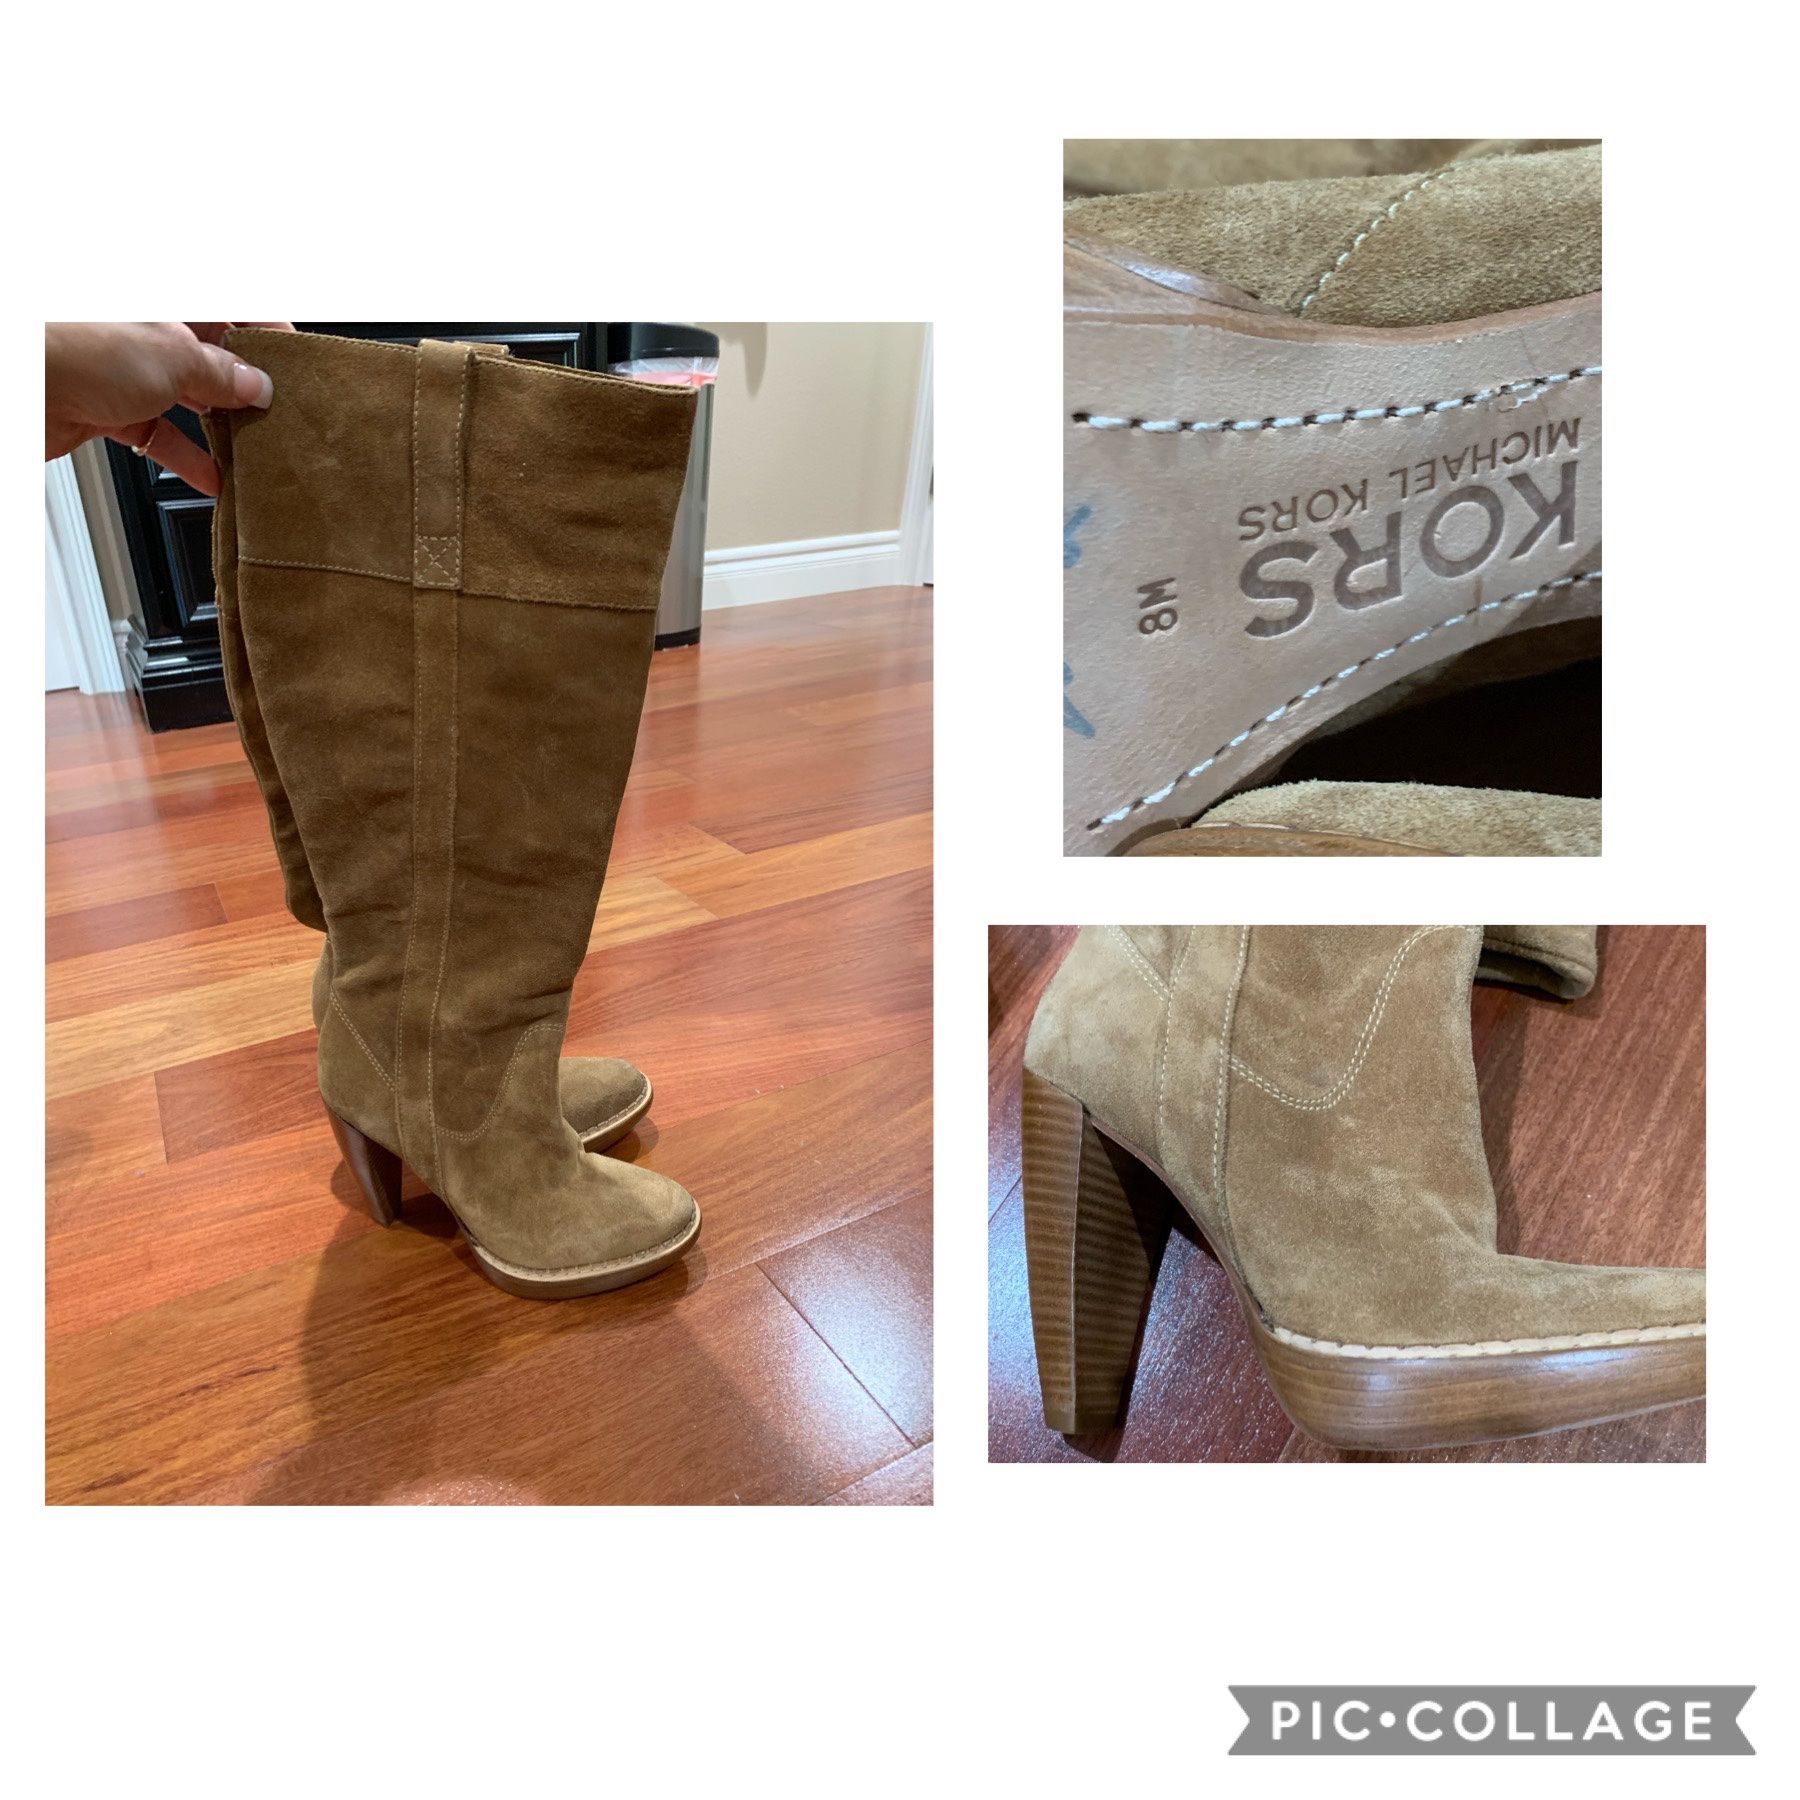 Michael Kors Suede Boots Size 8 NWT